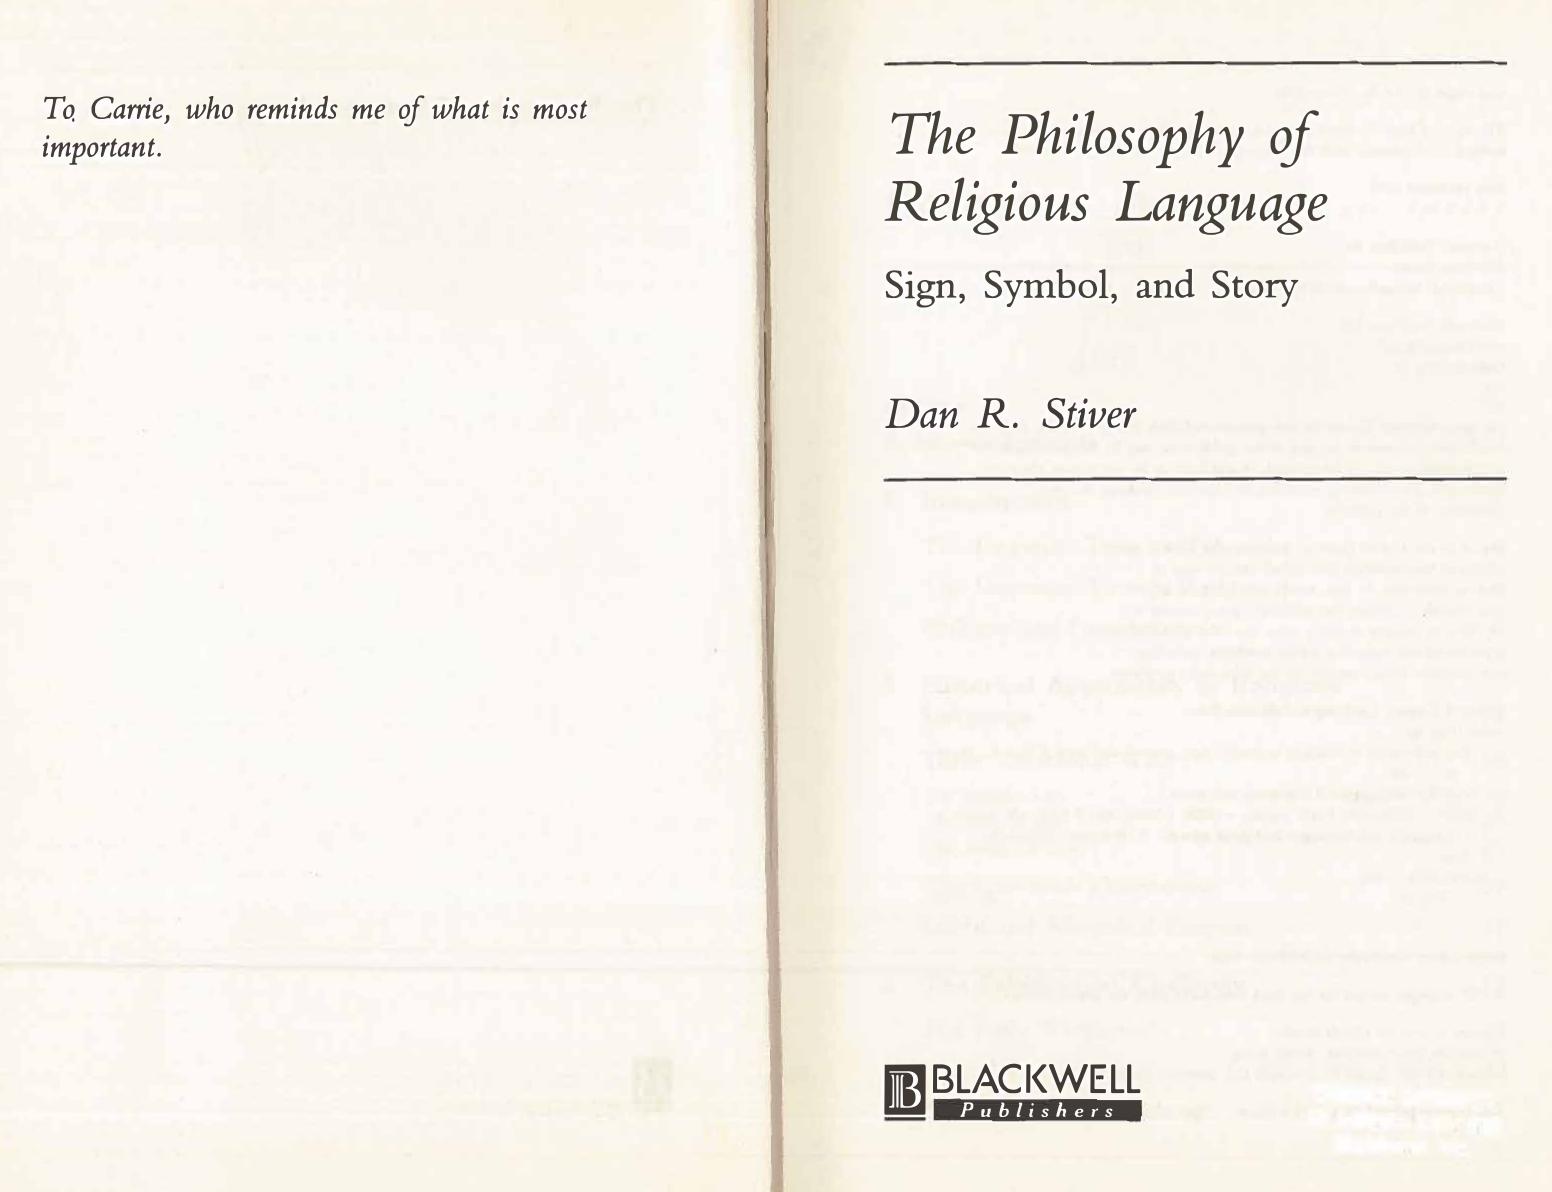 The Philosophy of Religious Language: Sign, Symbol, and Story